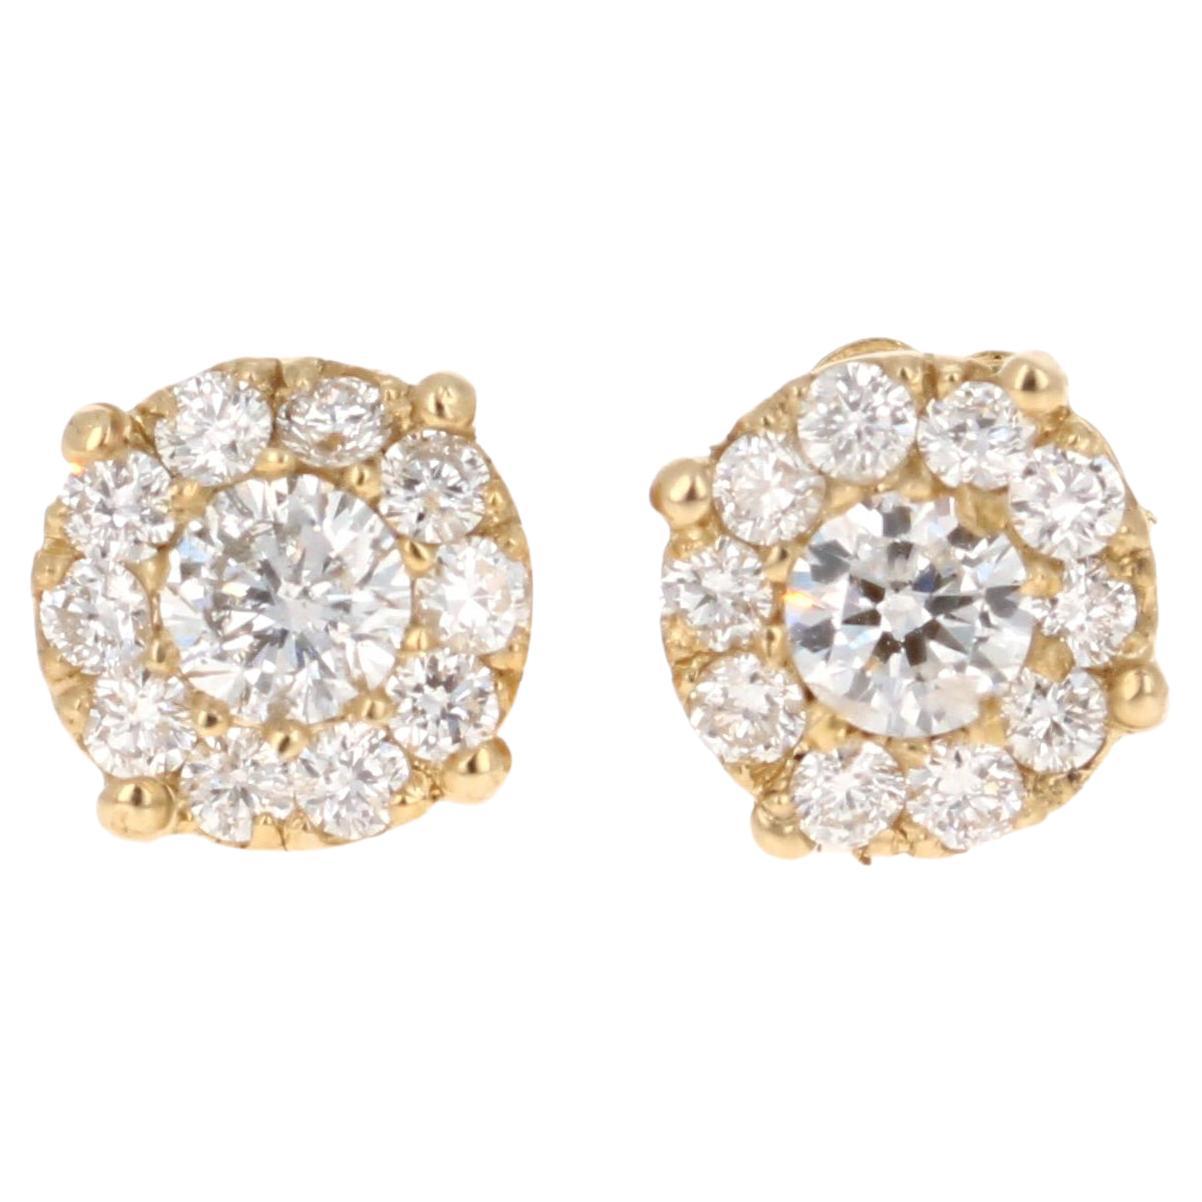 This classic design of diamond earrings has 22 Round Cut Diamonds that weigh 0.57 carats. The Clarity of the diamonds is SI and the Color is F.  The total carat weight of the earrings is 0.57 carats.

The backing of the earring is a standard push